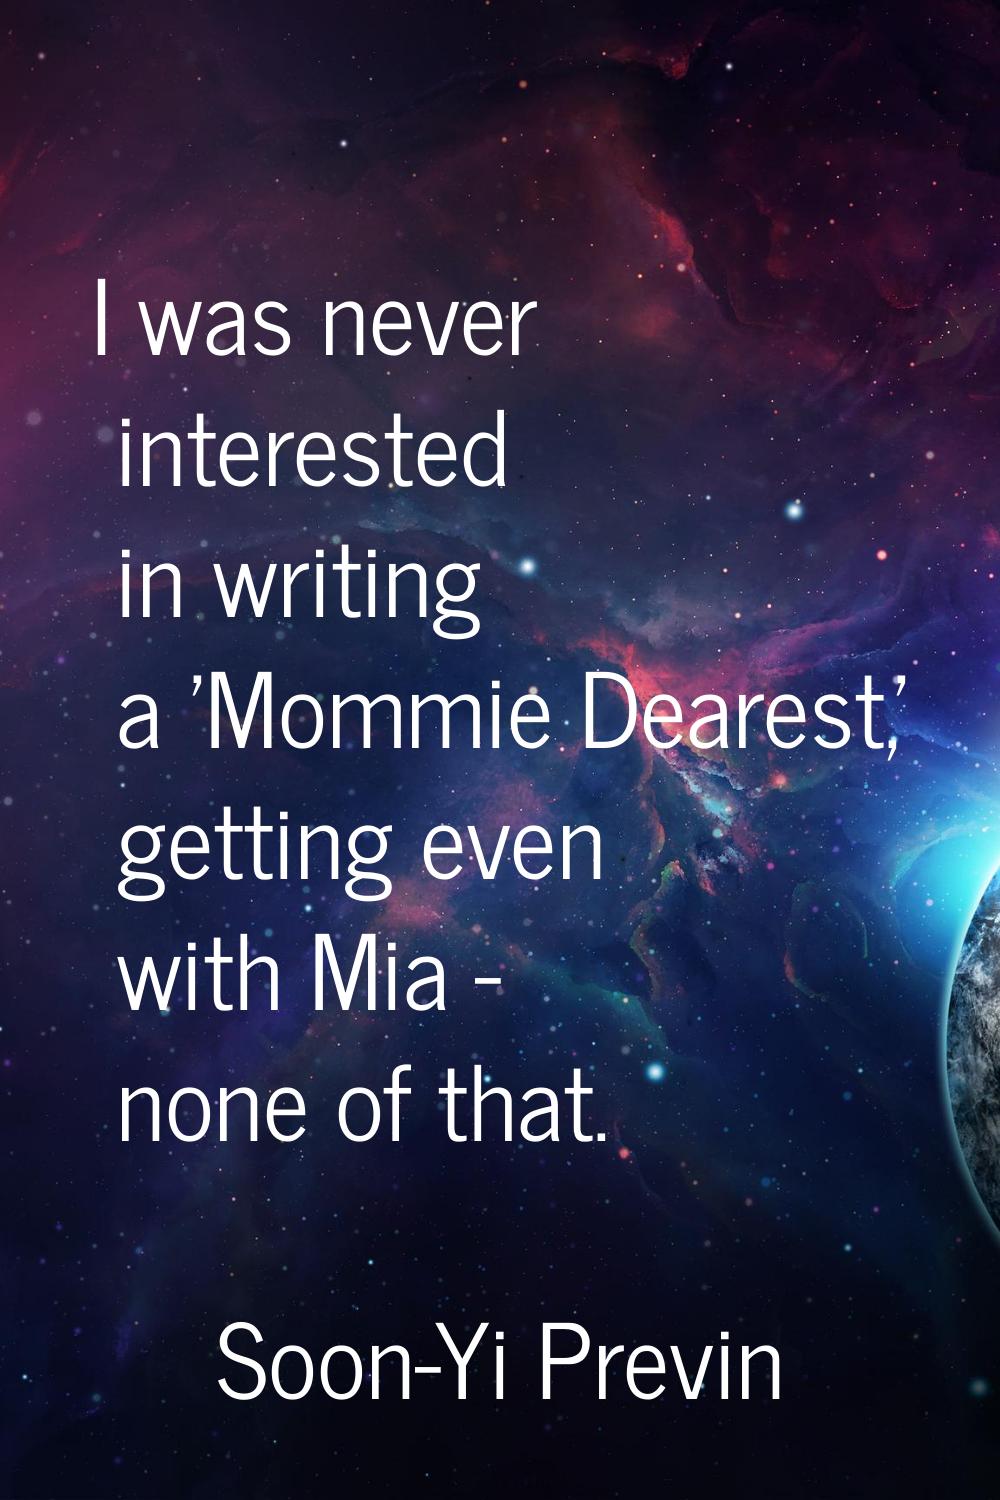 I was never interested in writing a 'Mommie Dearest,' getting even with Mia - none of that.